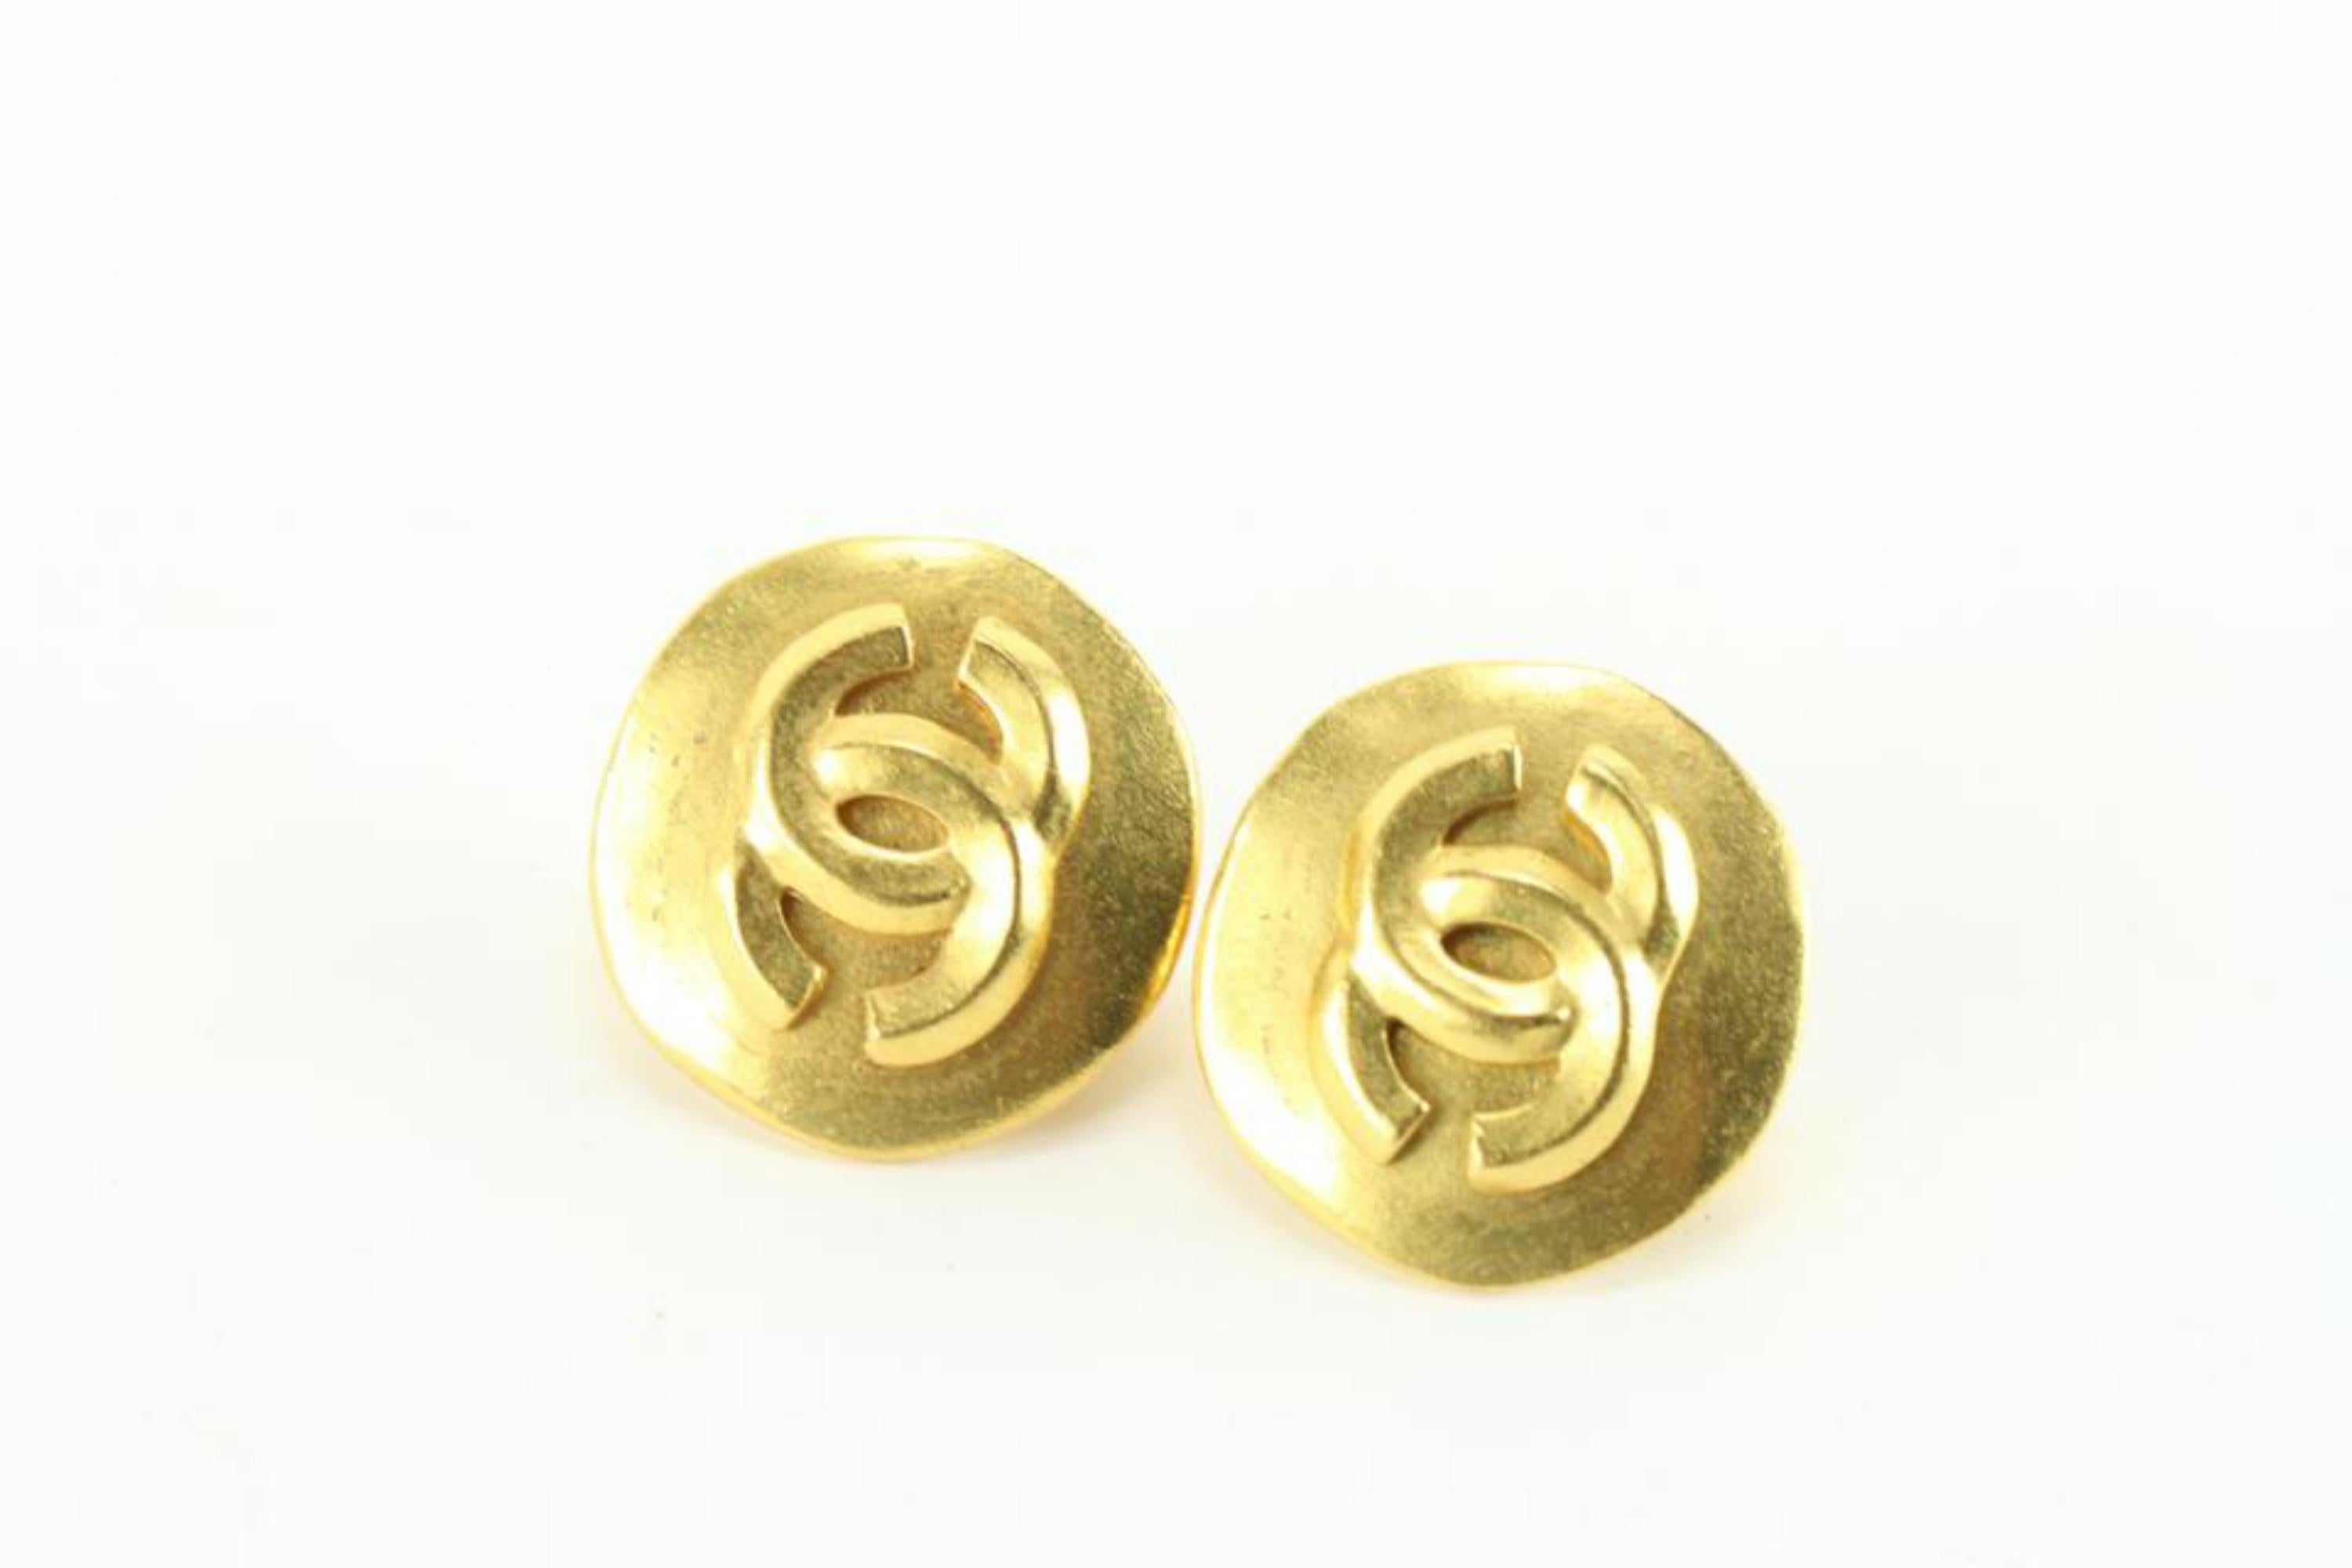 Chanel 96p 24k Gold Plated Round CC Logo Smooth Earrings 72cz726s For Sale 4